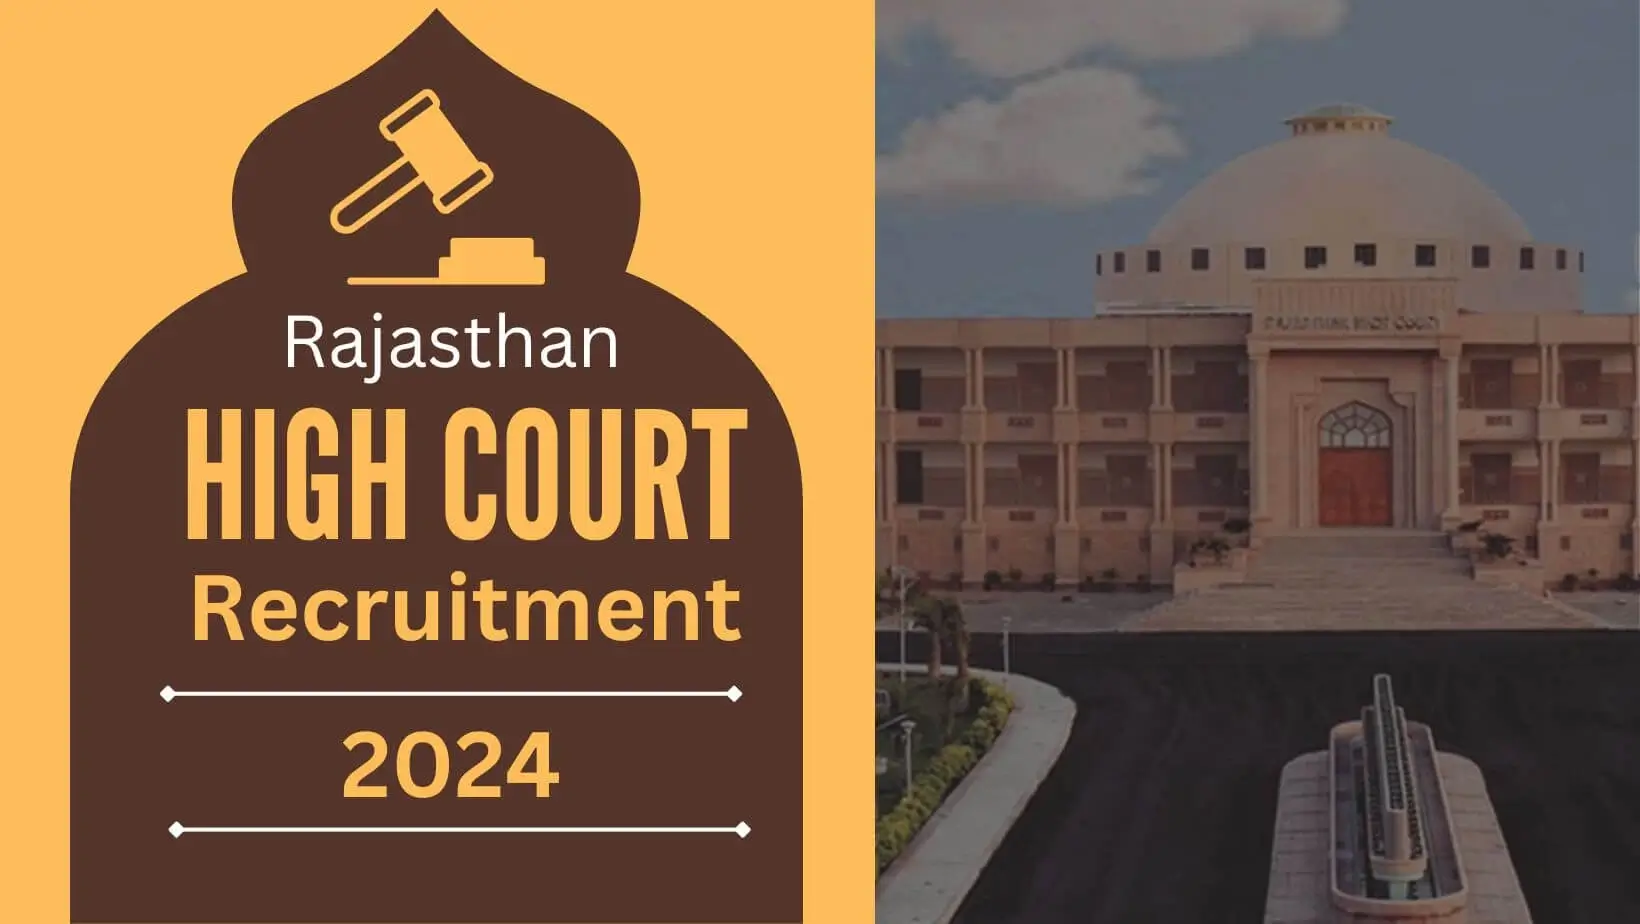 Rajasthan High Court Recruitment 2023-24 all notification details about vacancies, eligibility,, important dates and online apply process.